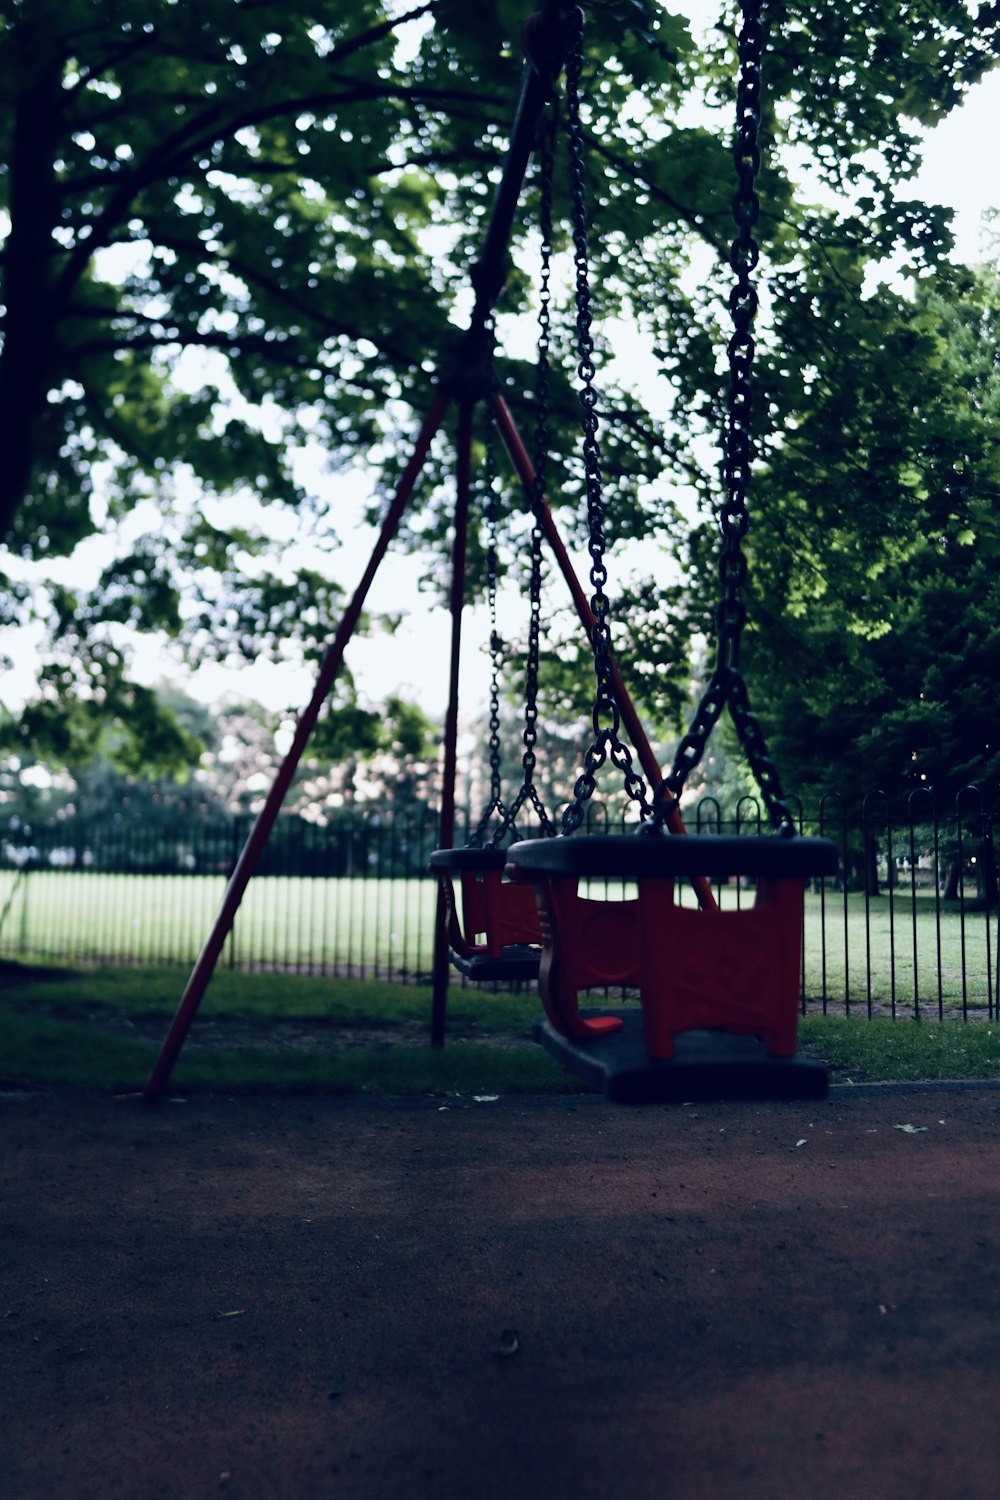 red and black swing near green trees during daytime photo – Free Longford  park Image on Unsplash